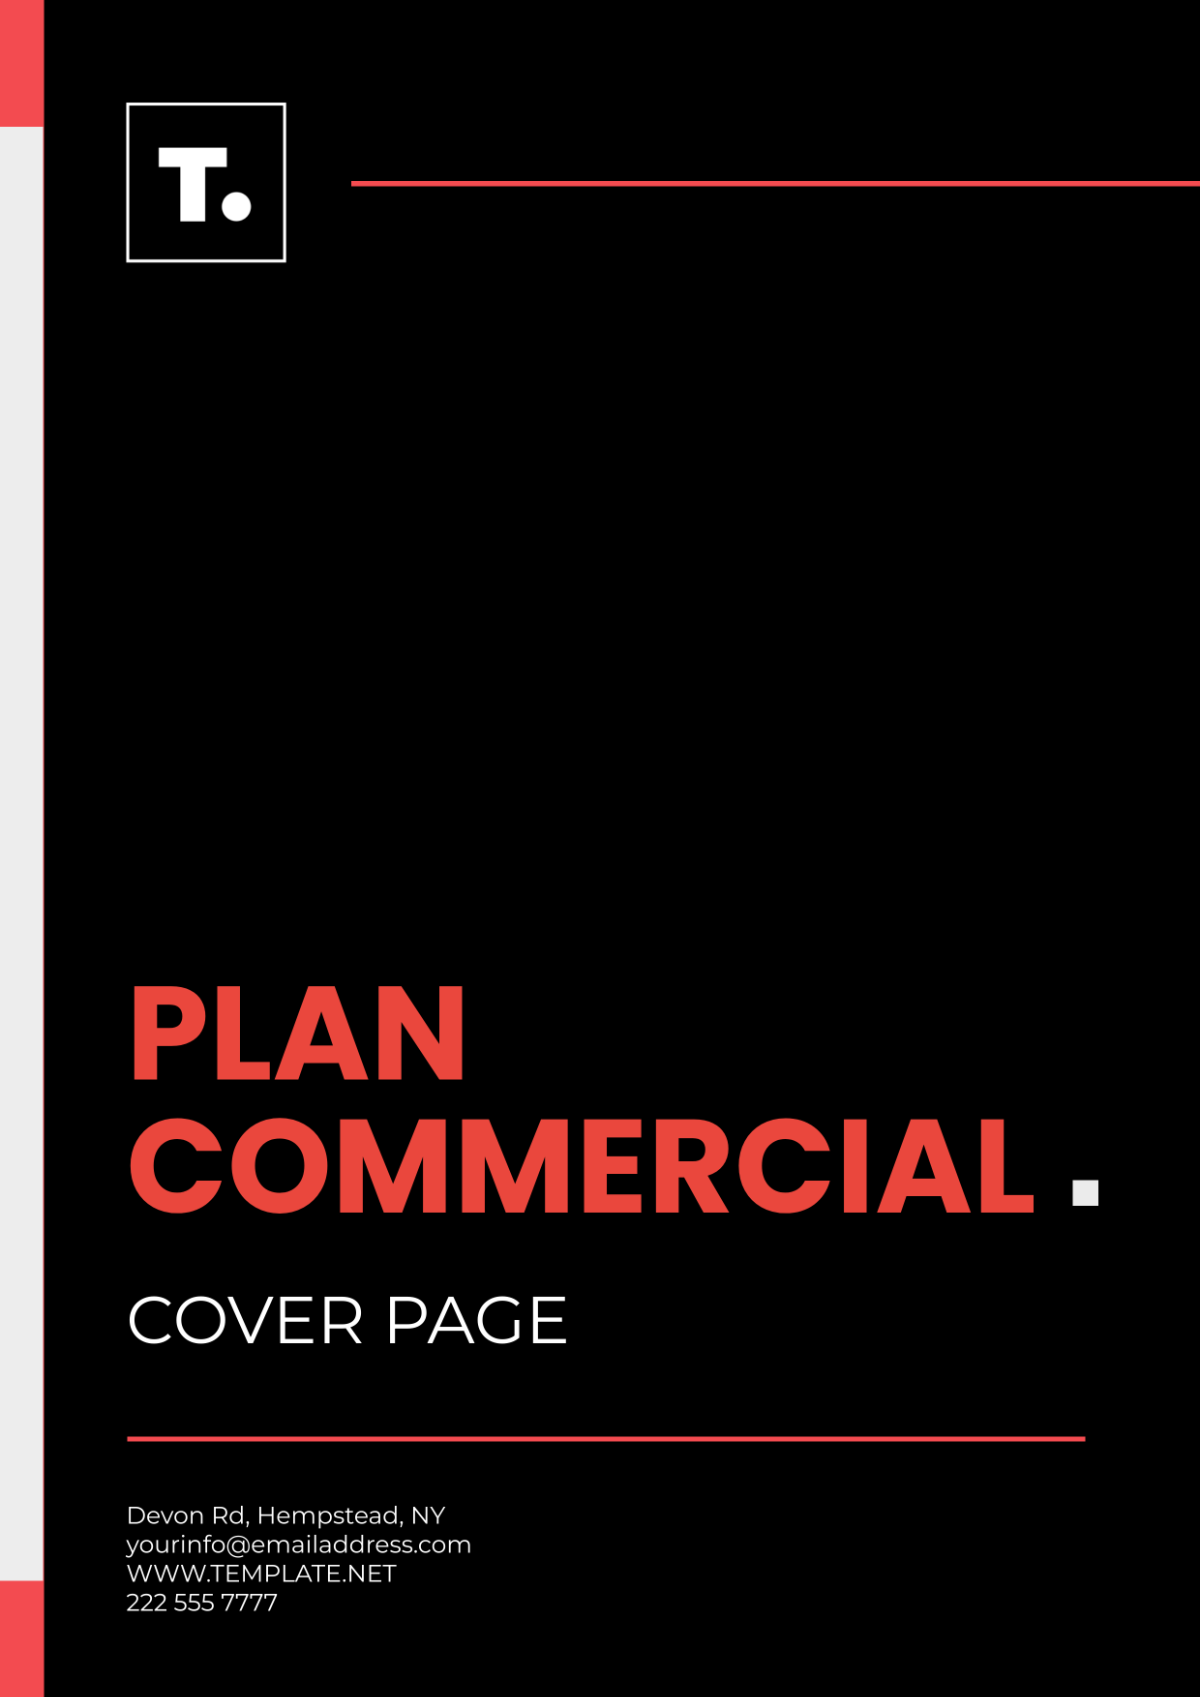 Plan Commercial Cover Page